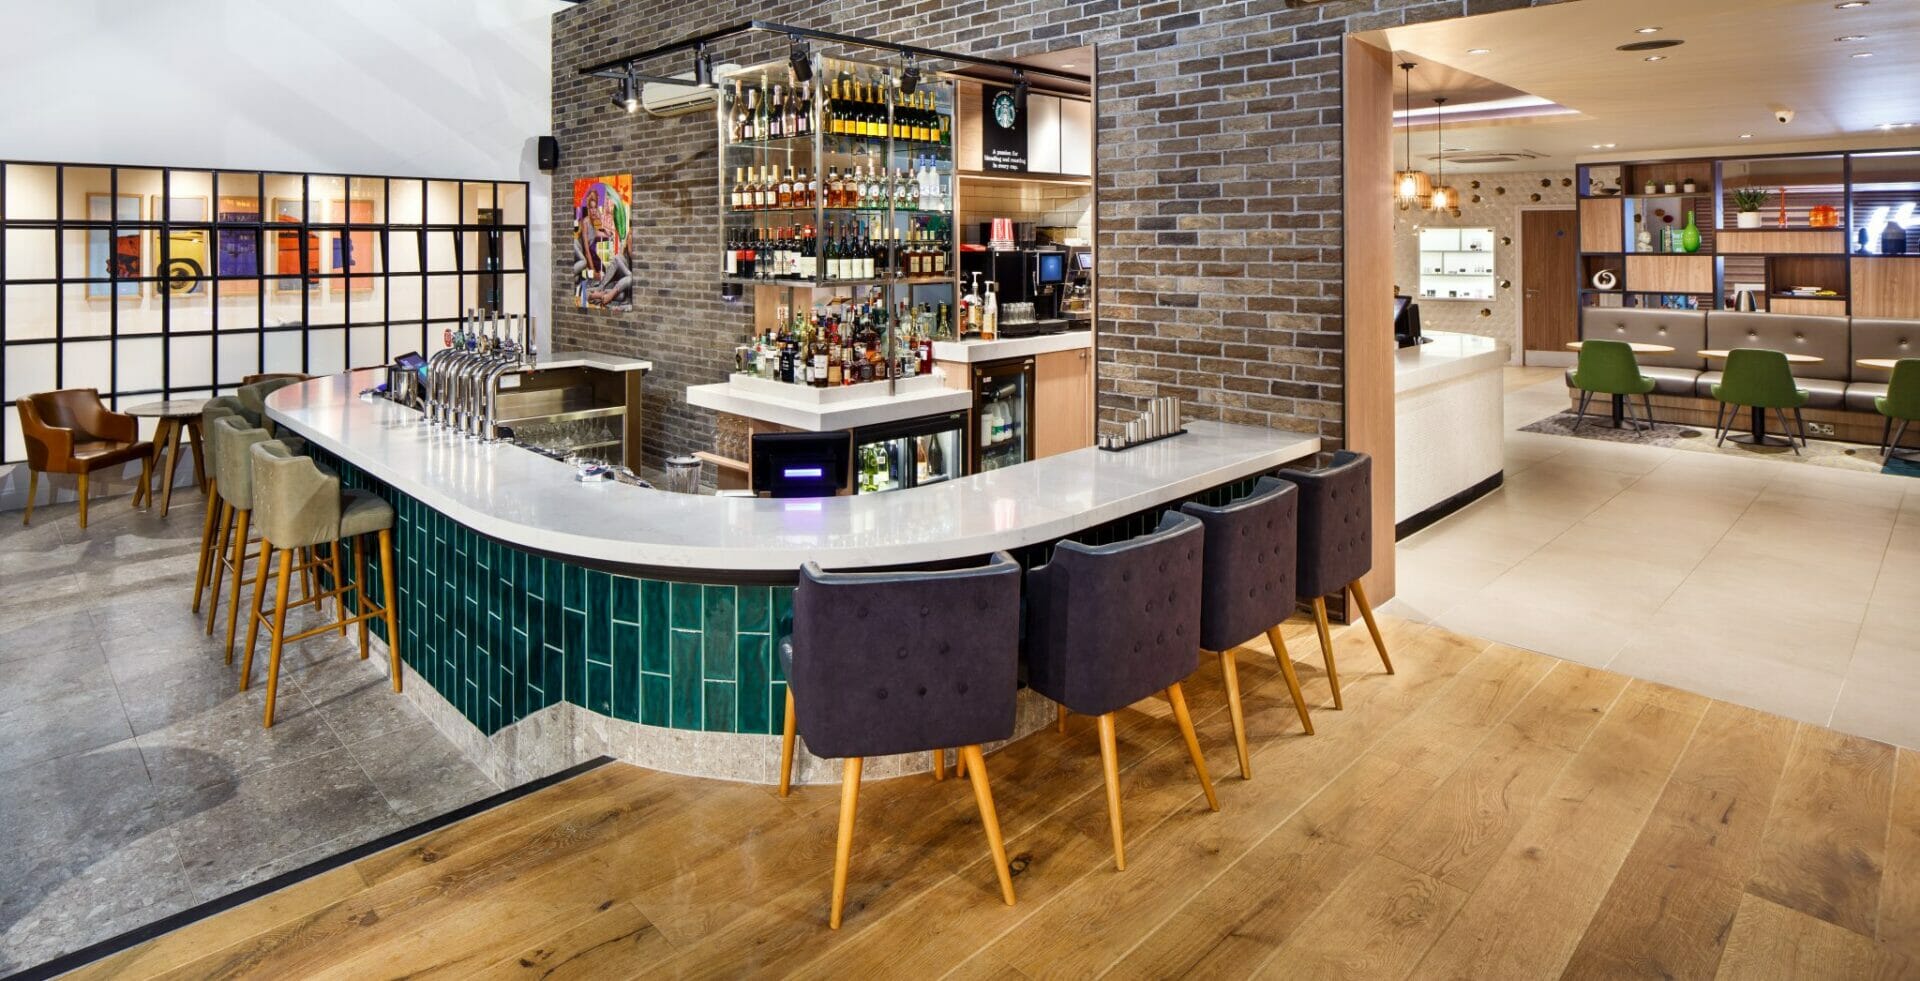 New Marco Pierre White Restaurant Launches at Holiday Inn Brentwood